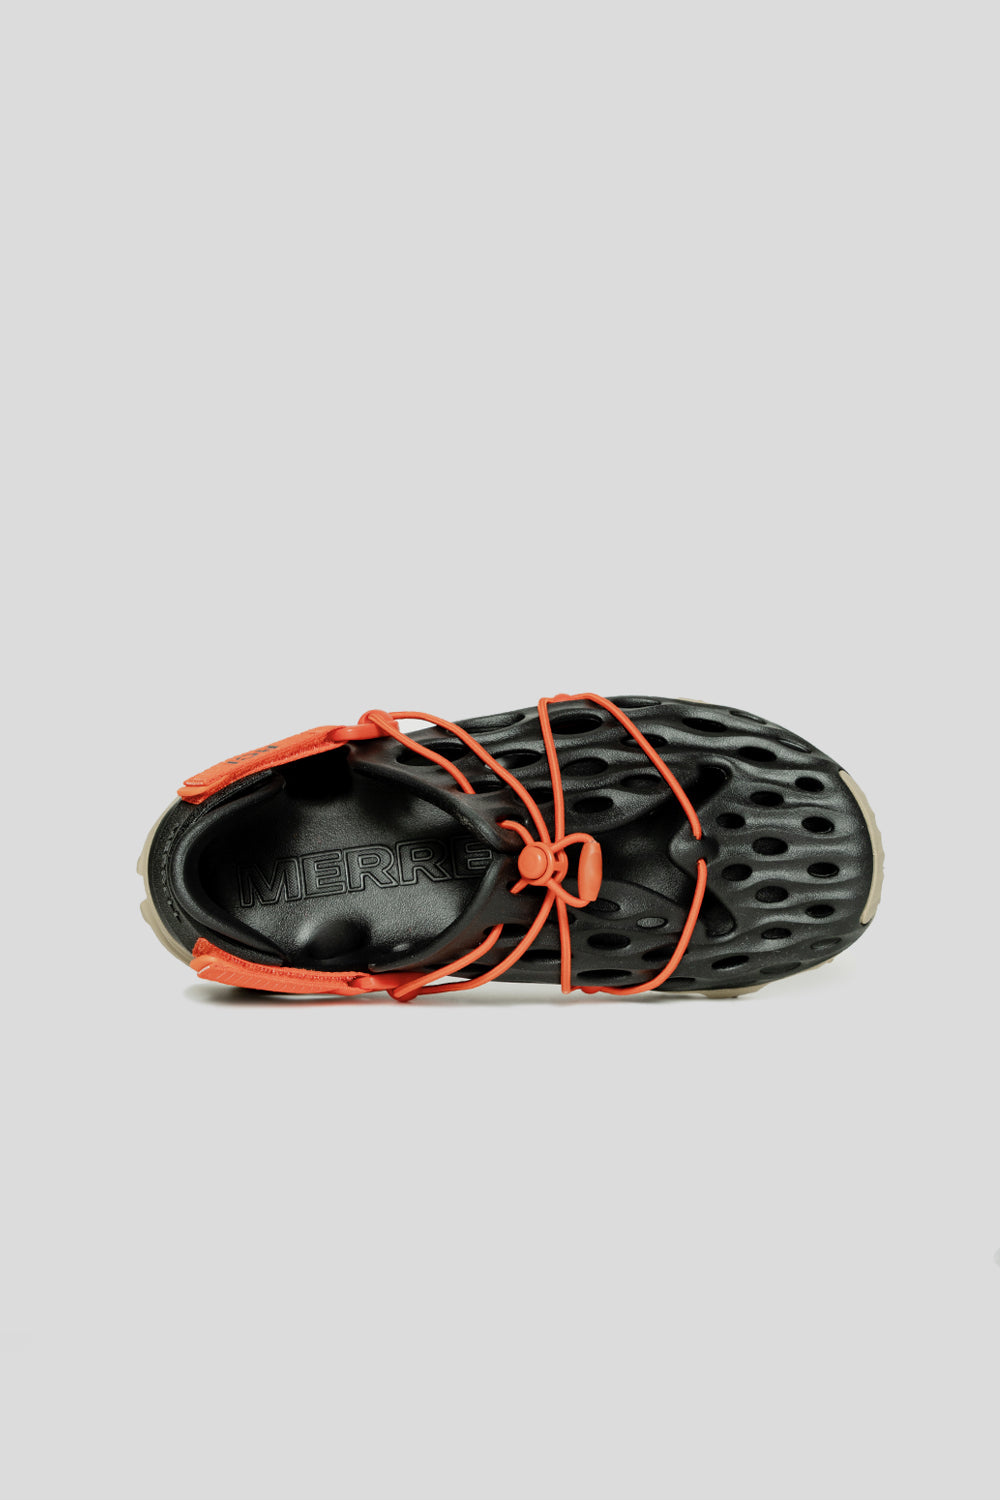 Merrell 1TRL x Reese Cooper Hydro Moc At Cage Black